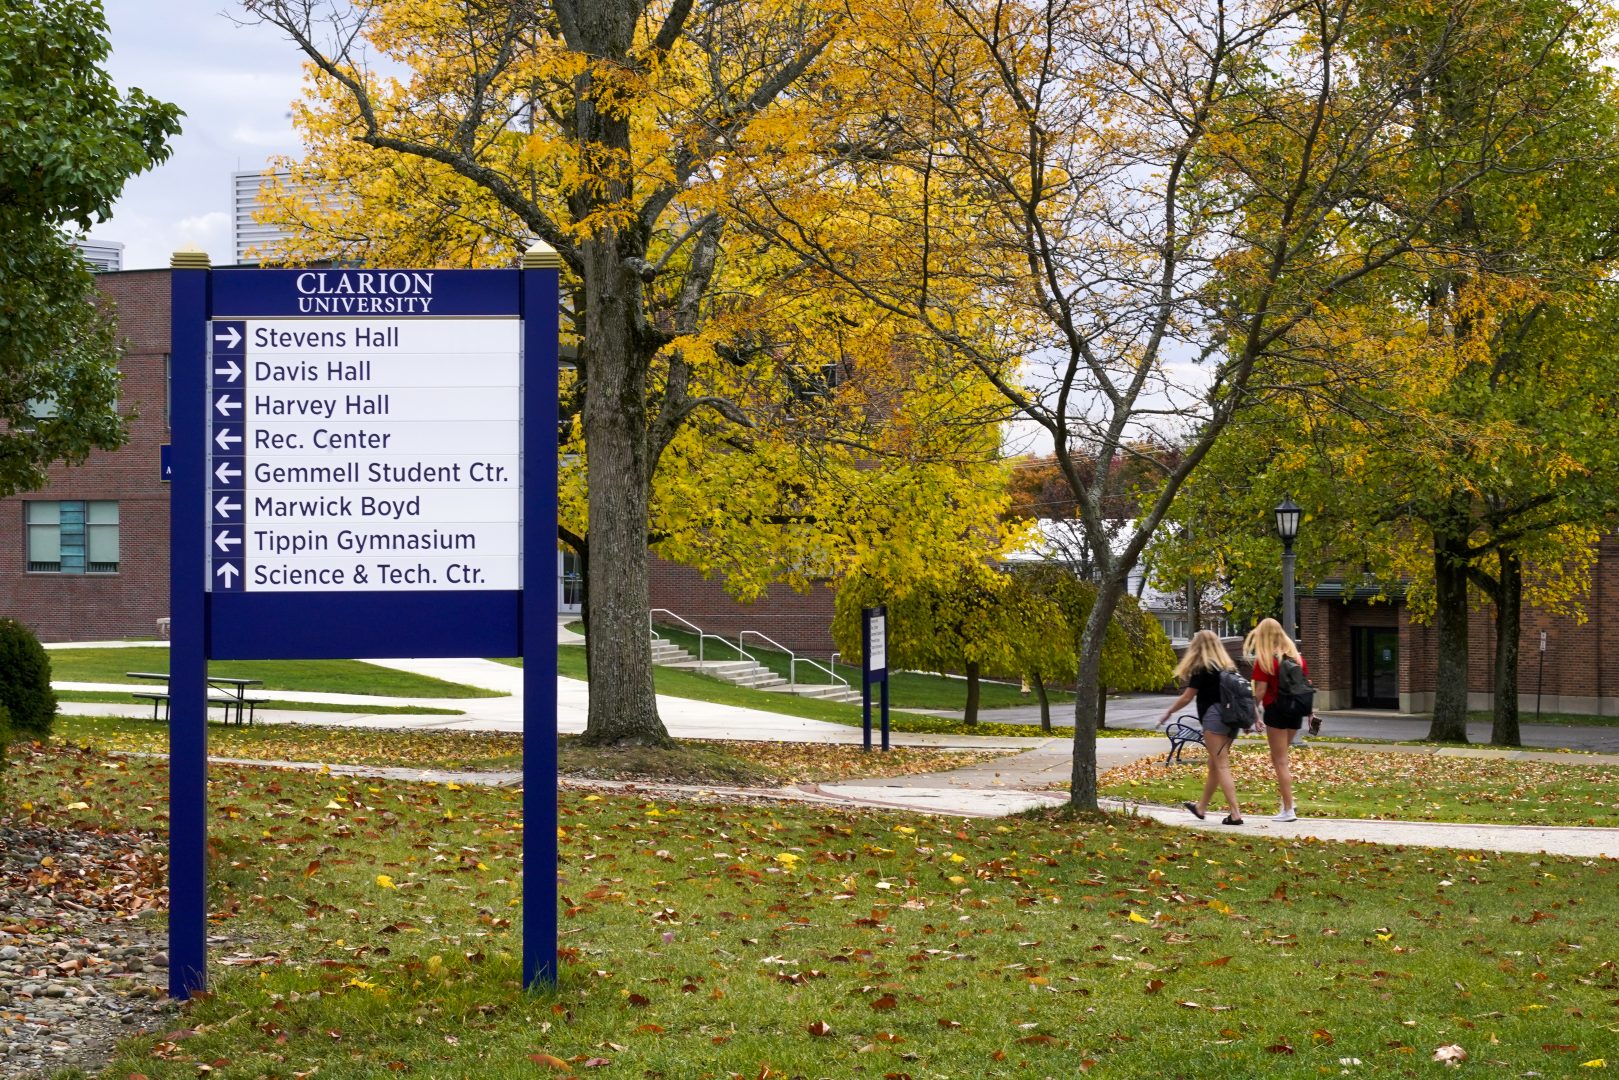 FILE PHOTO: Students walk through the campus of Clarion University in Clarion, Pa, on Wednesday, Oct. 21, 2020.